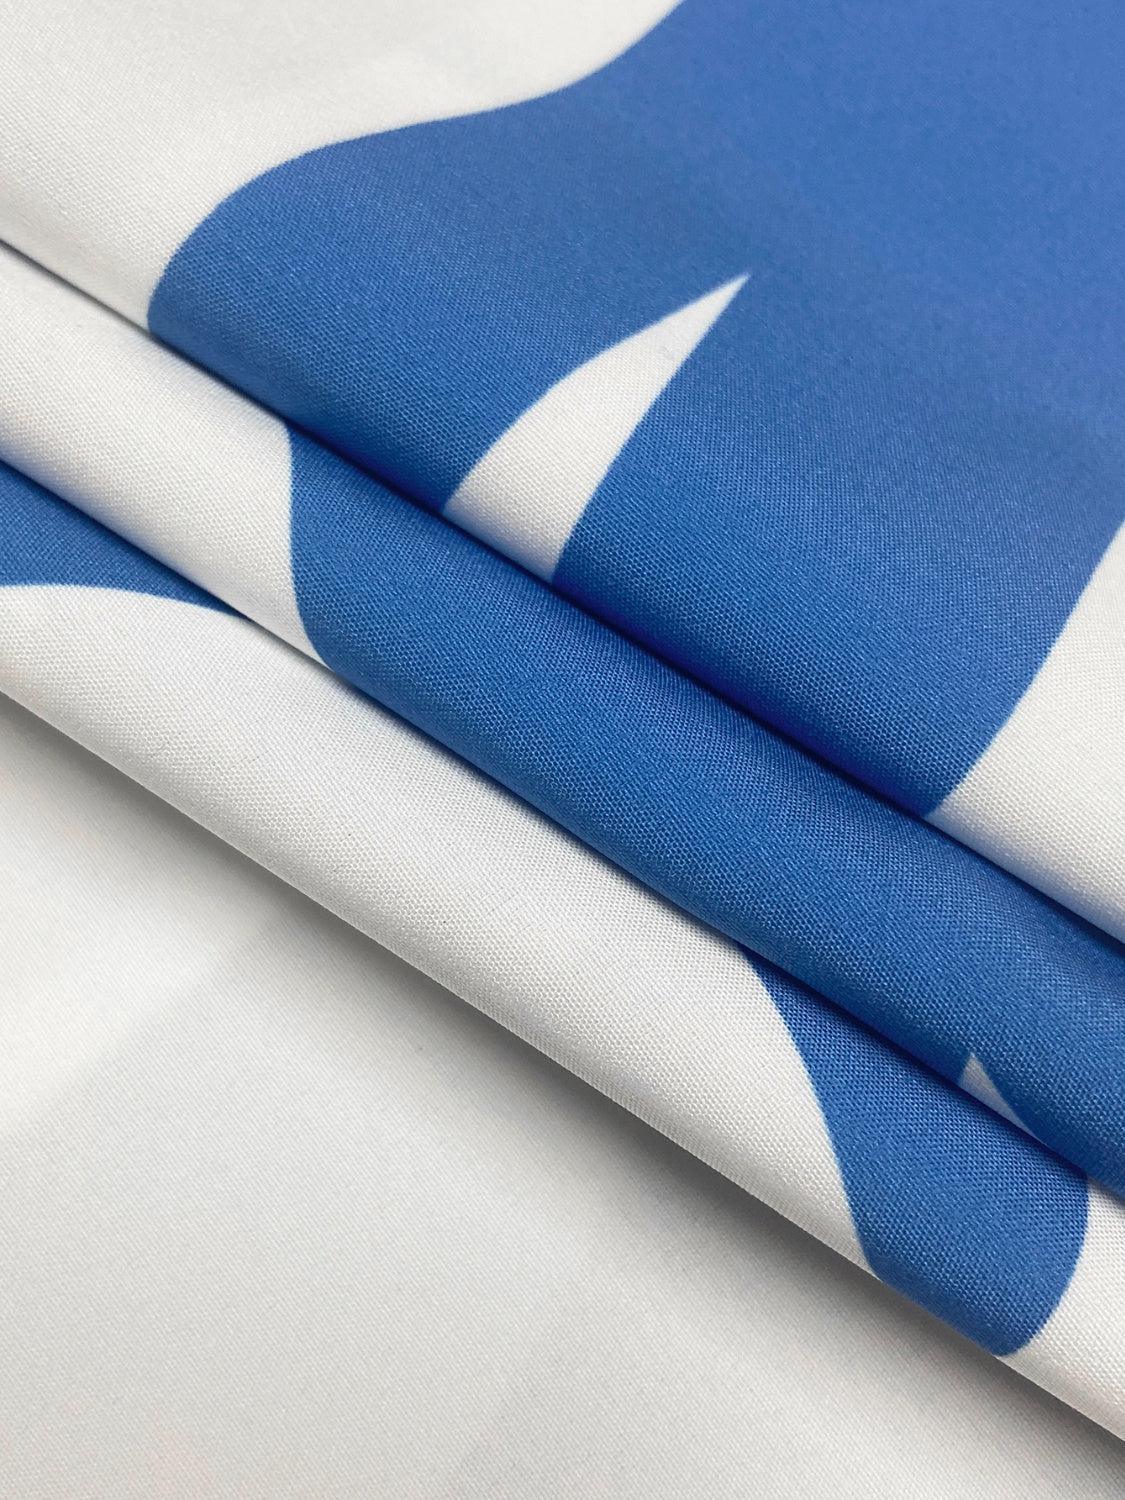 a close up of a blue and white fabric